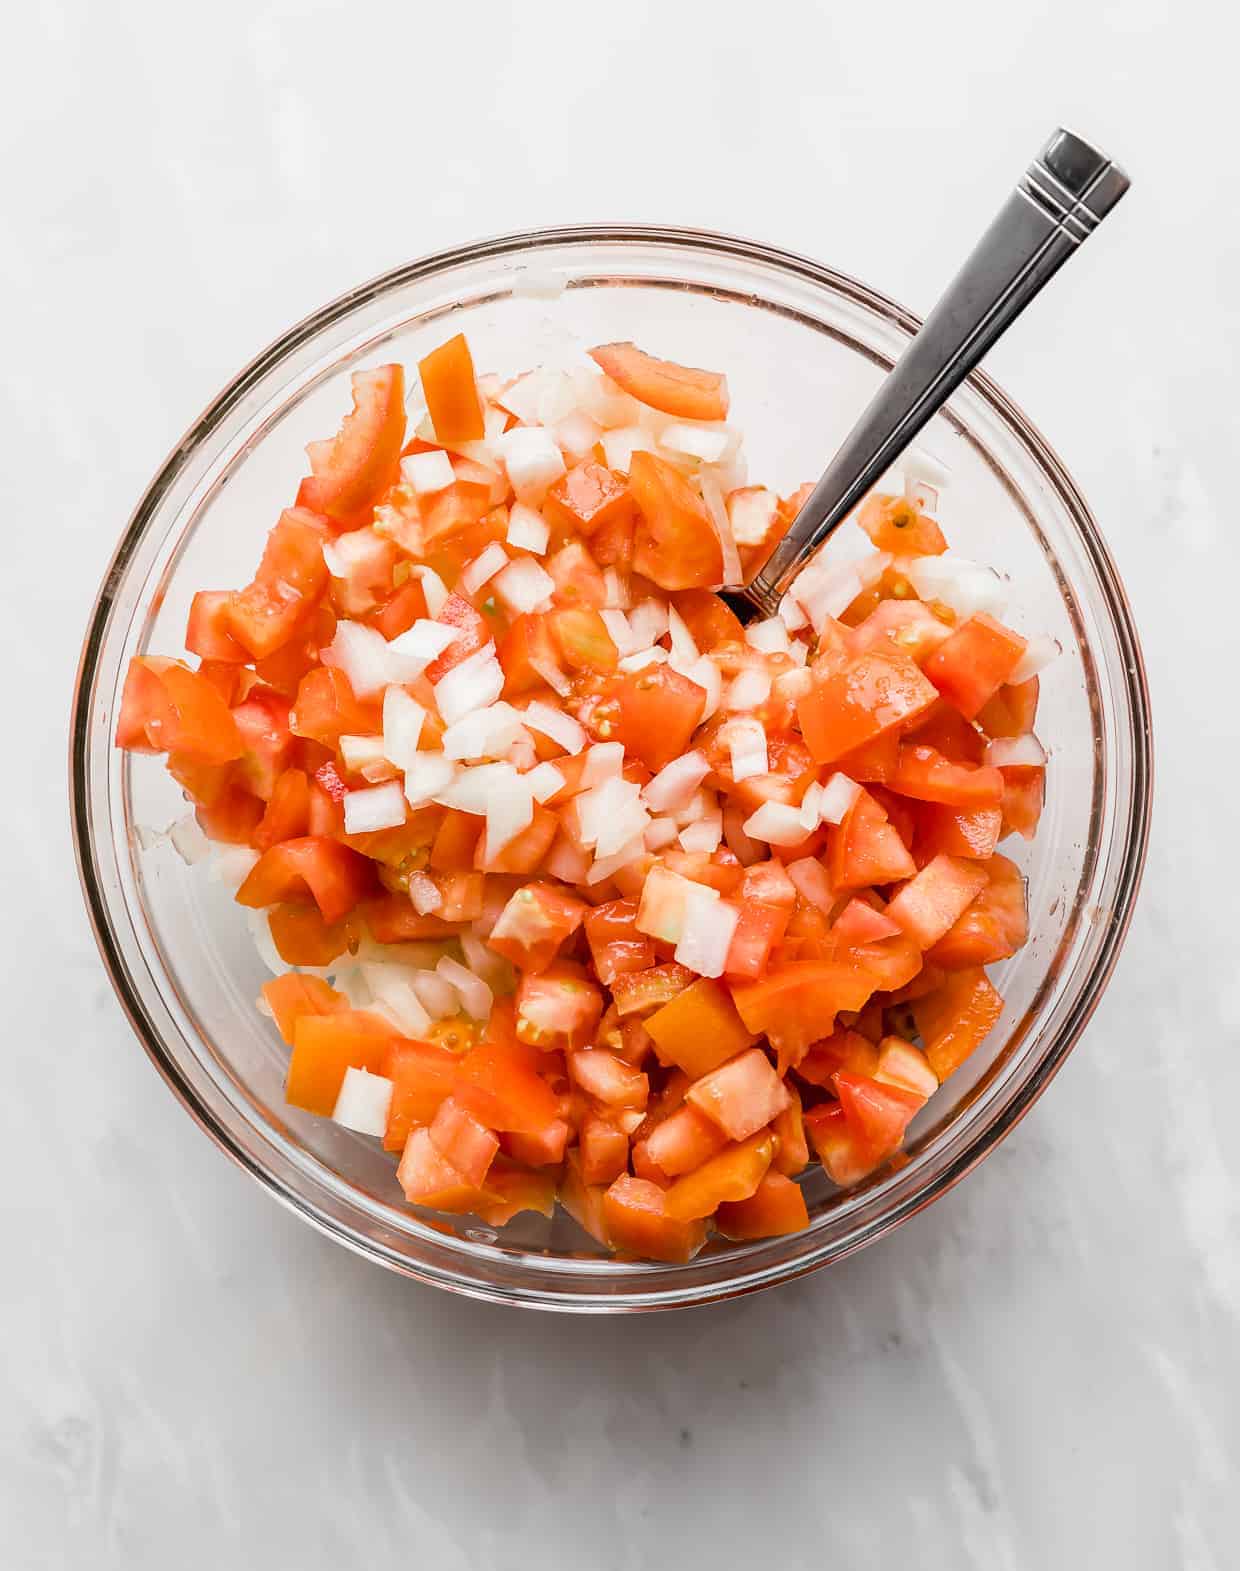 Diced onion and diced tomatoes in a glass bowl against a white background. 